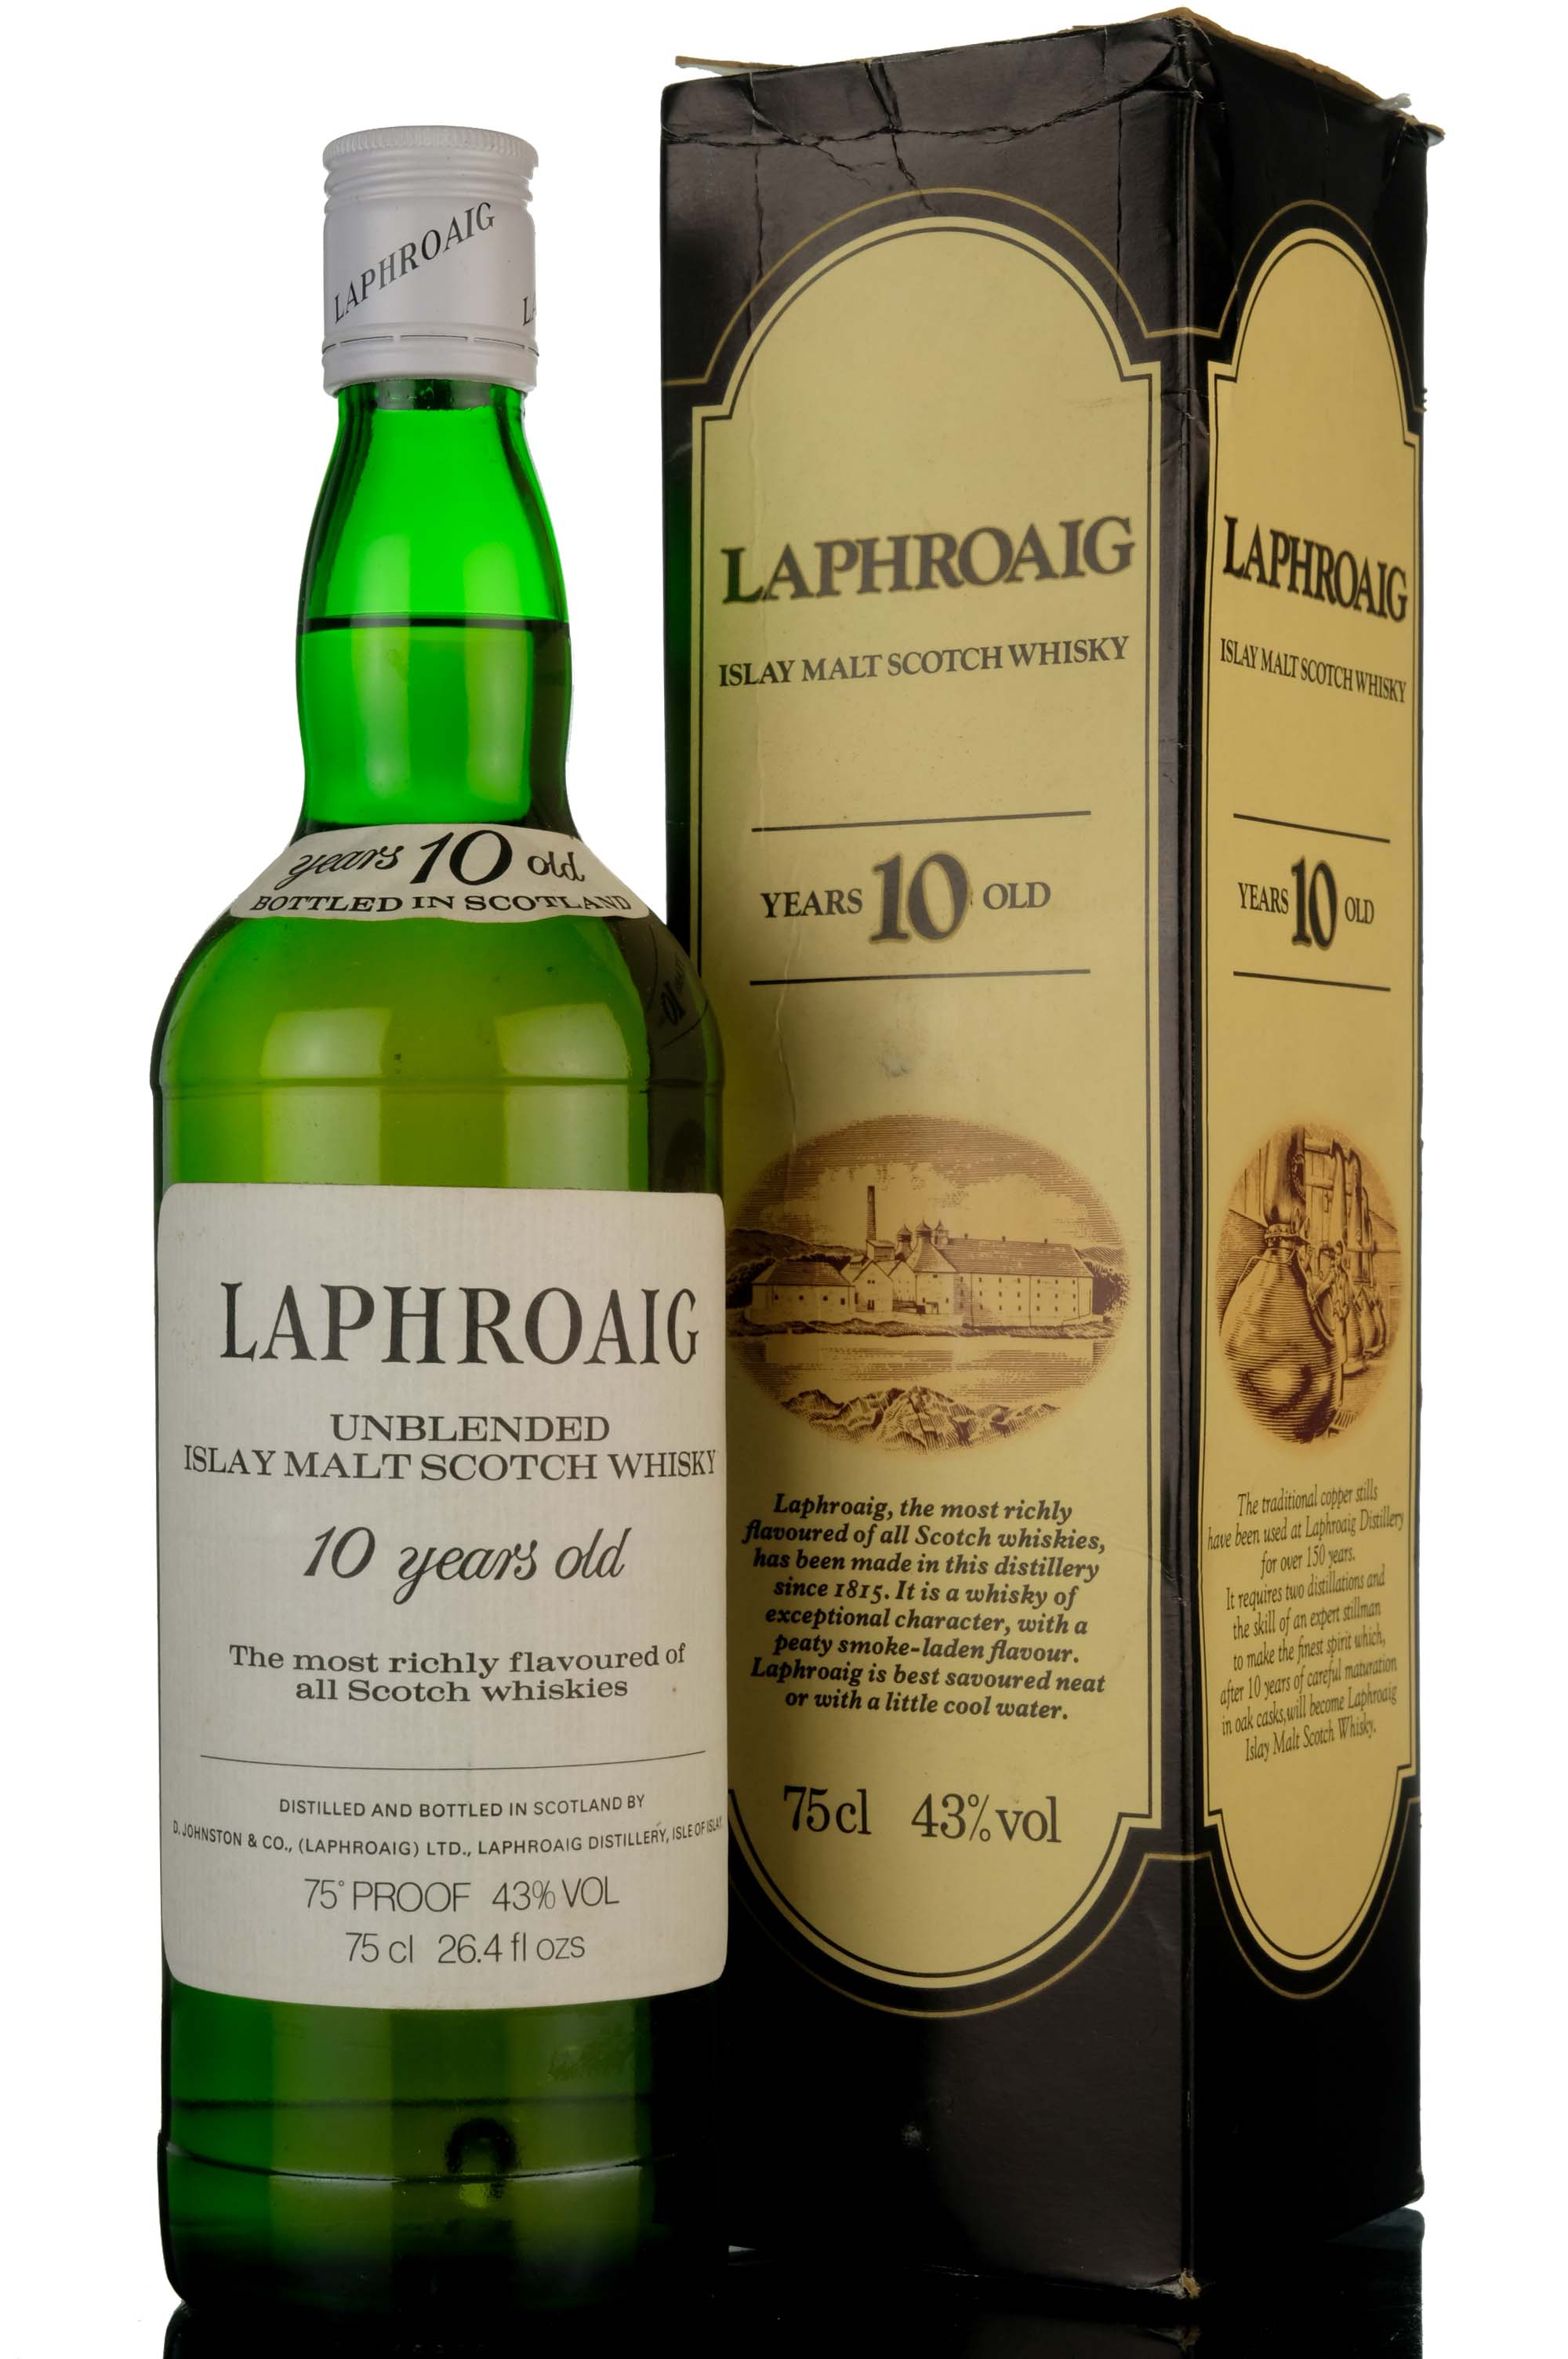 Laphroaig 10 Year Old - Unblended - Late 1970s